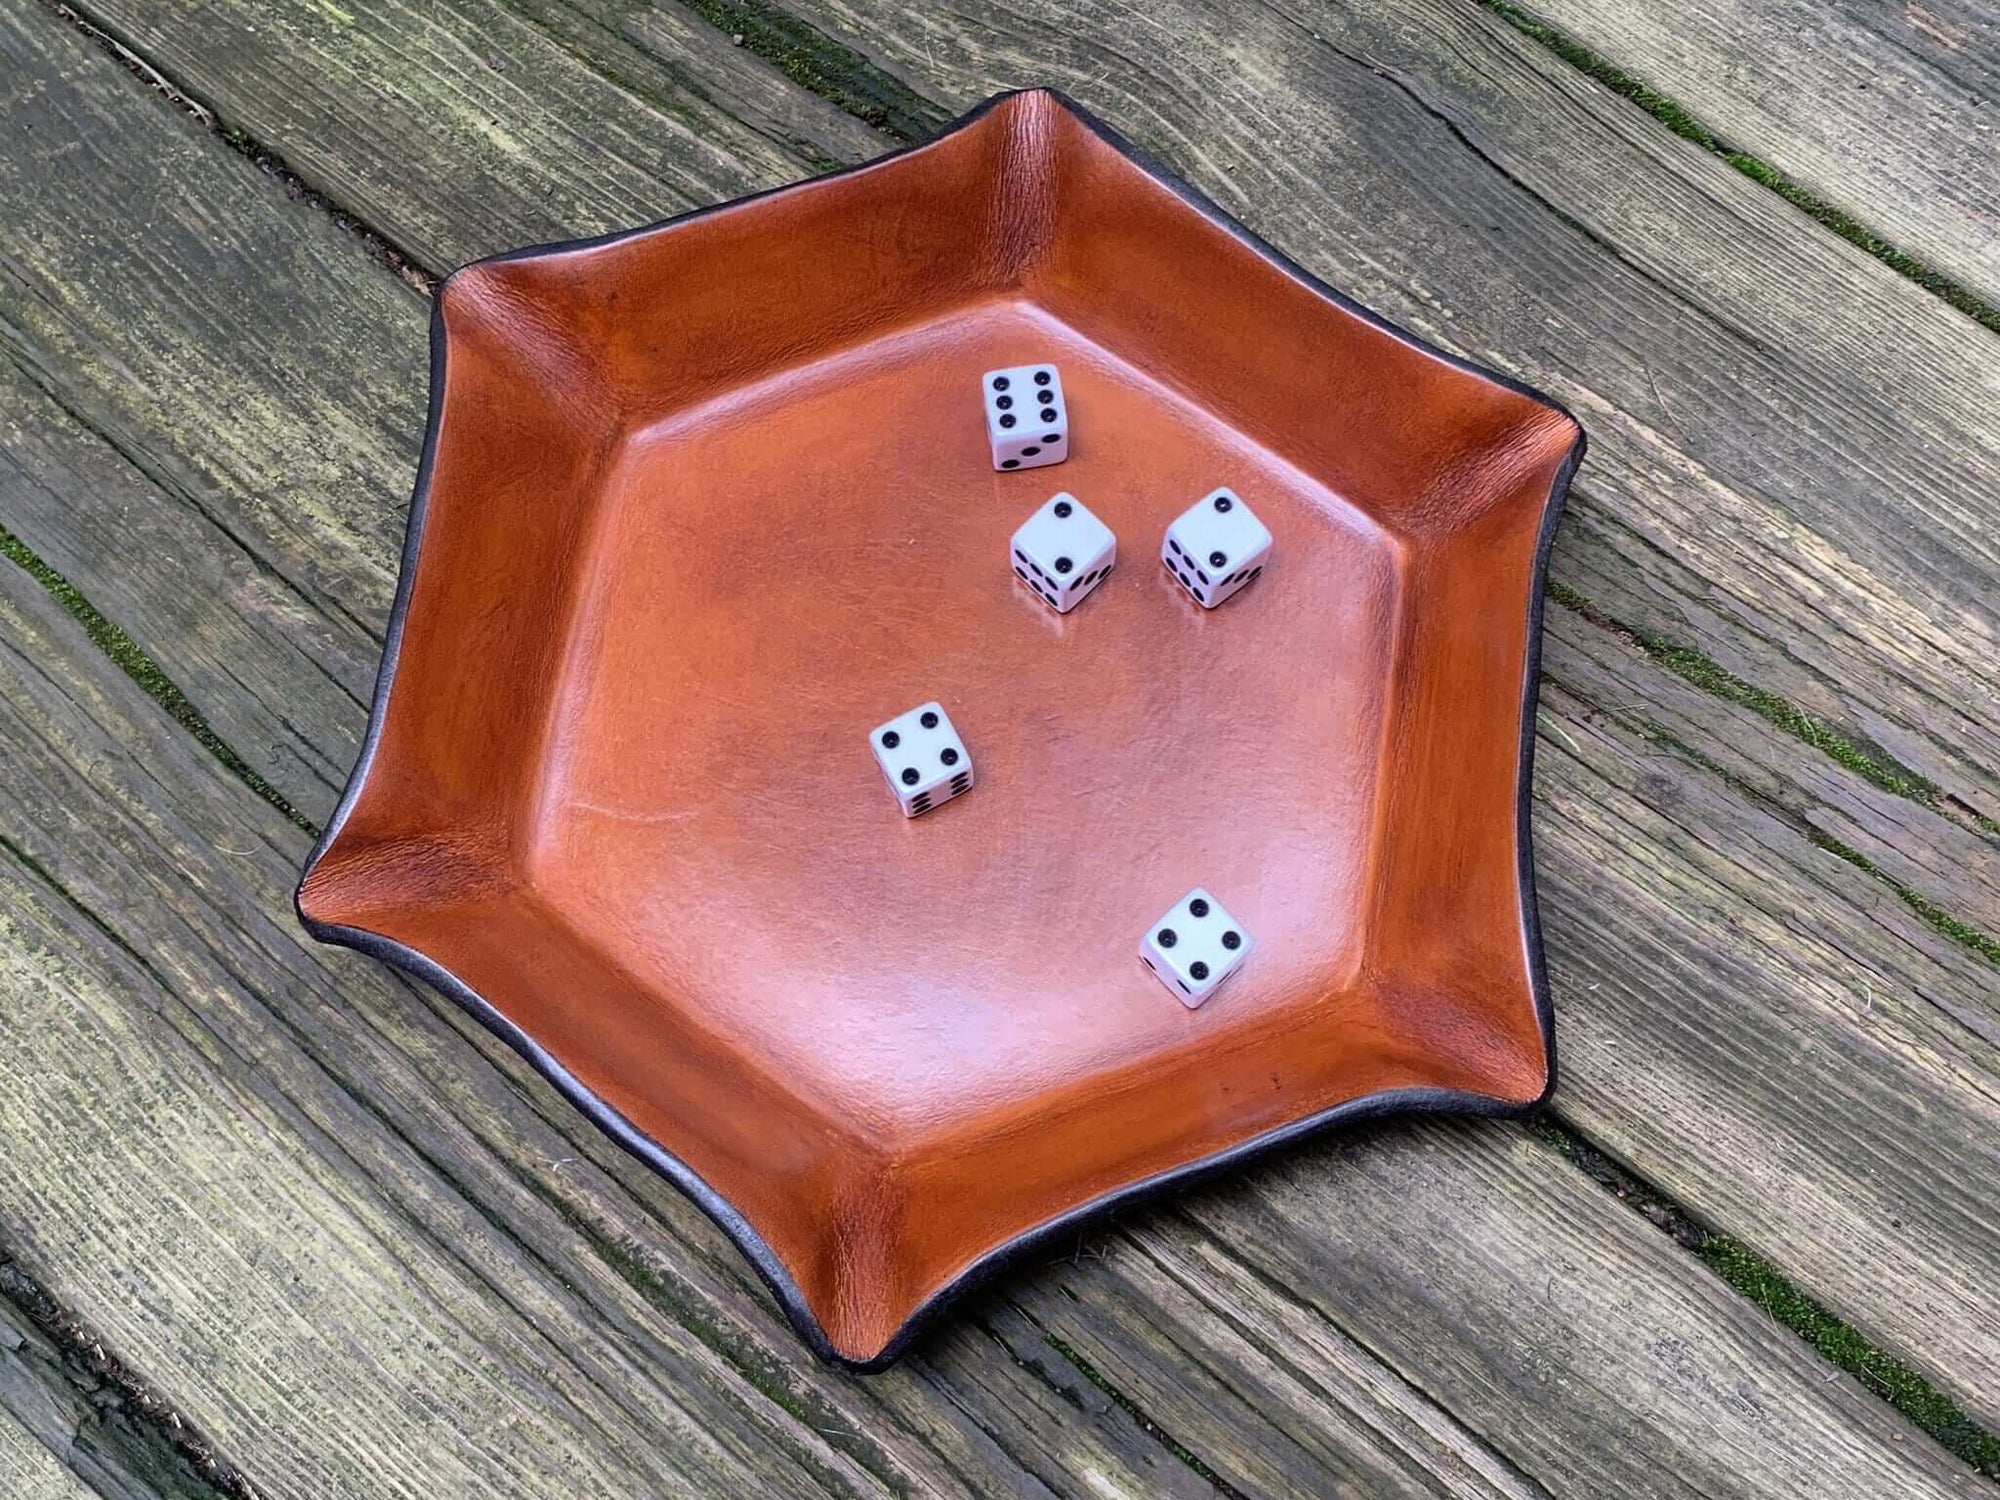 Leather tray for fantasy dice game.